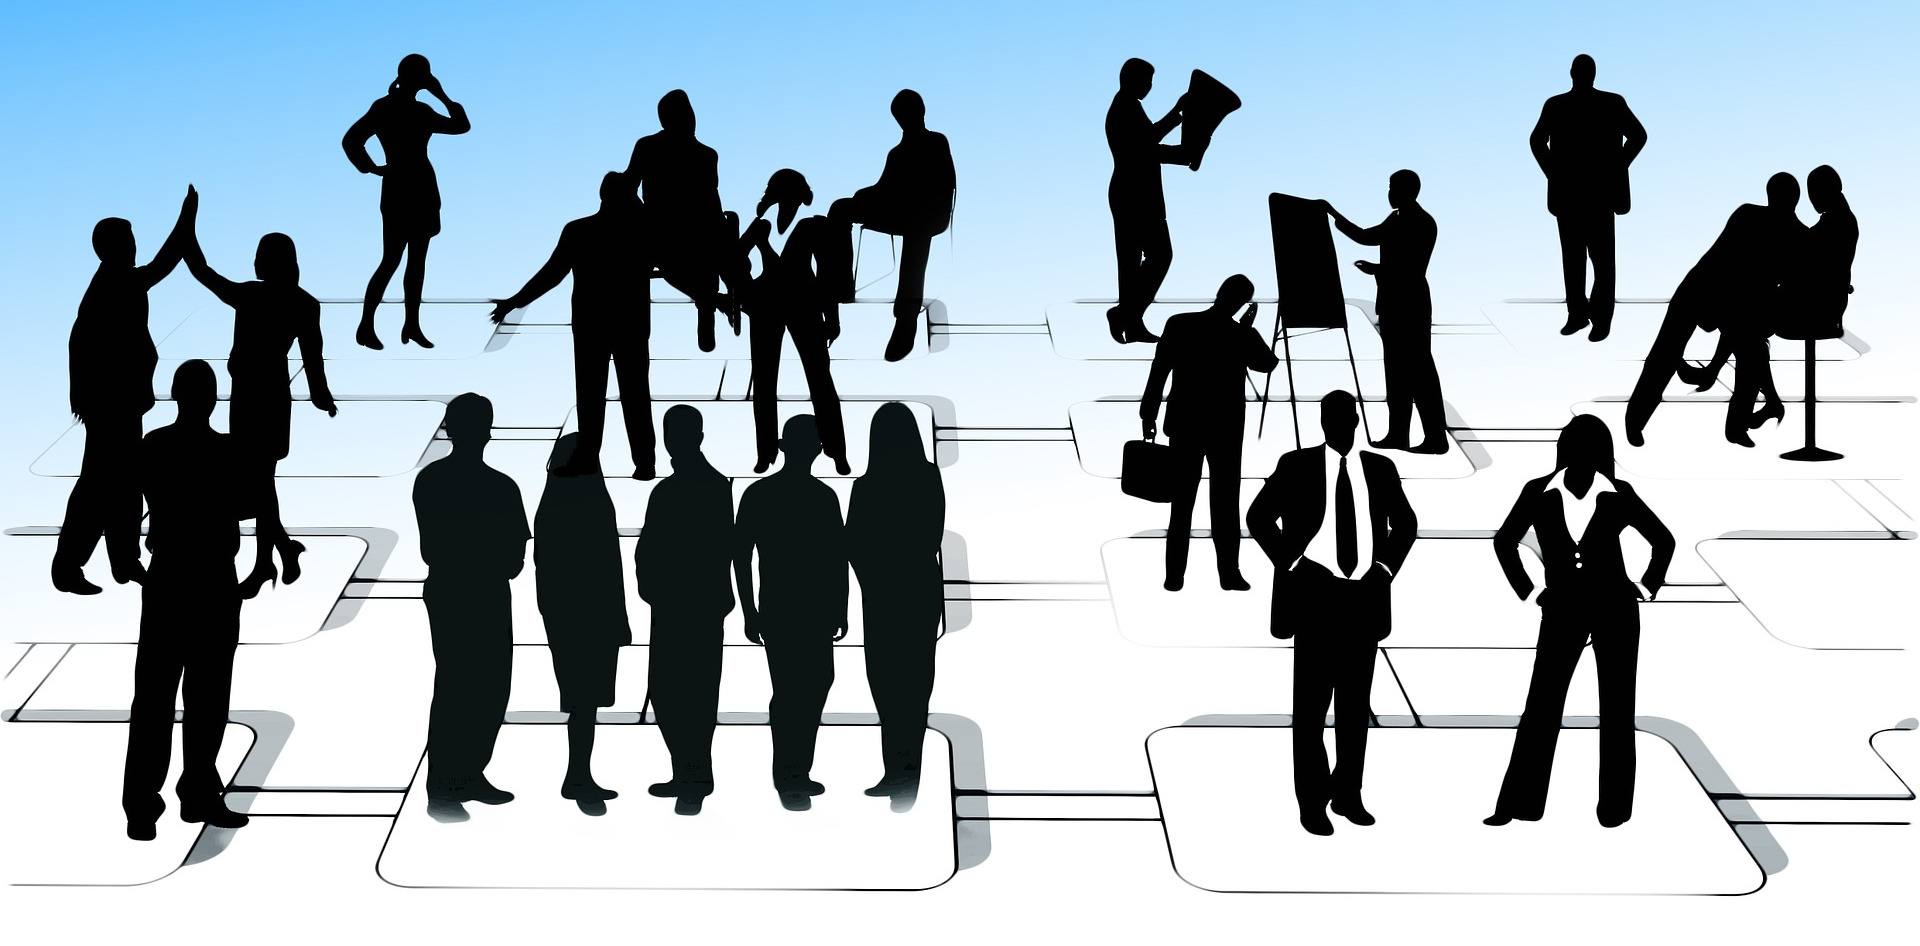 Business people silhouettes